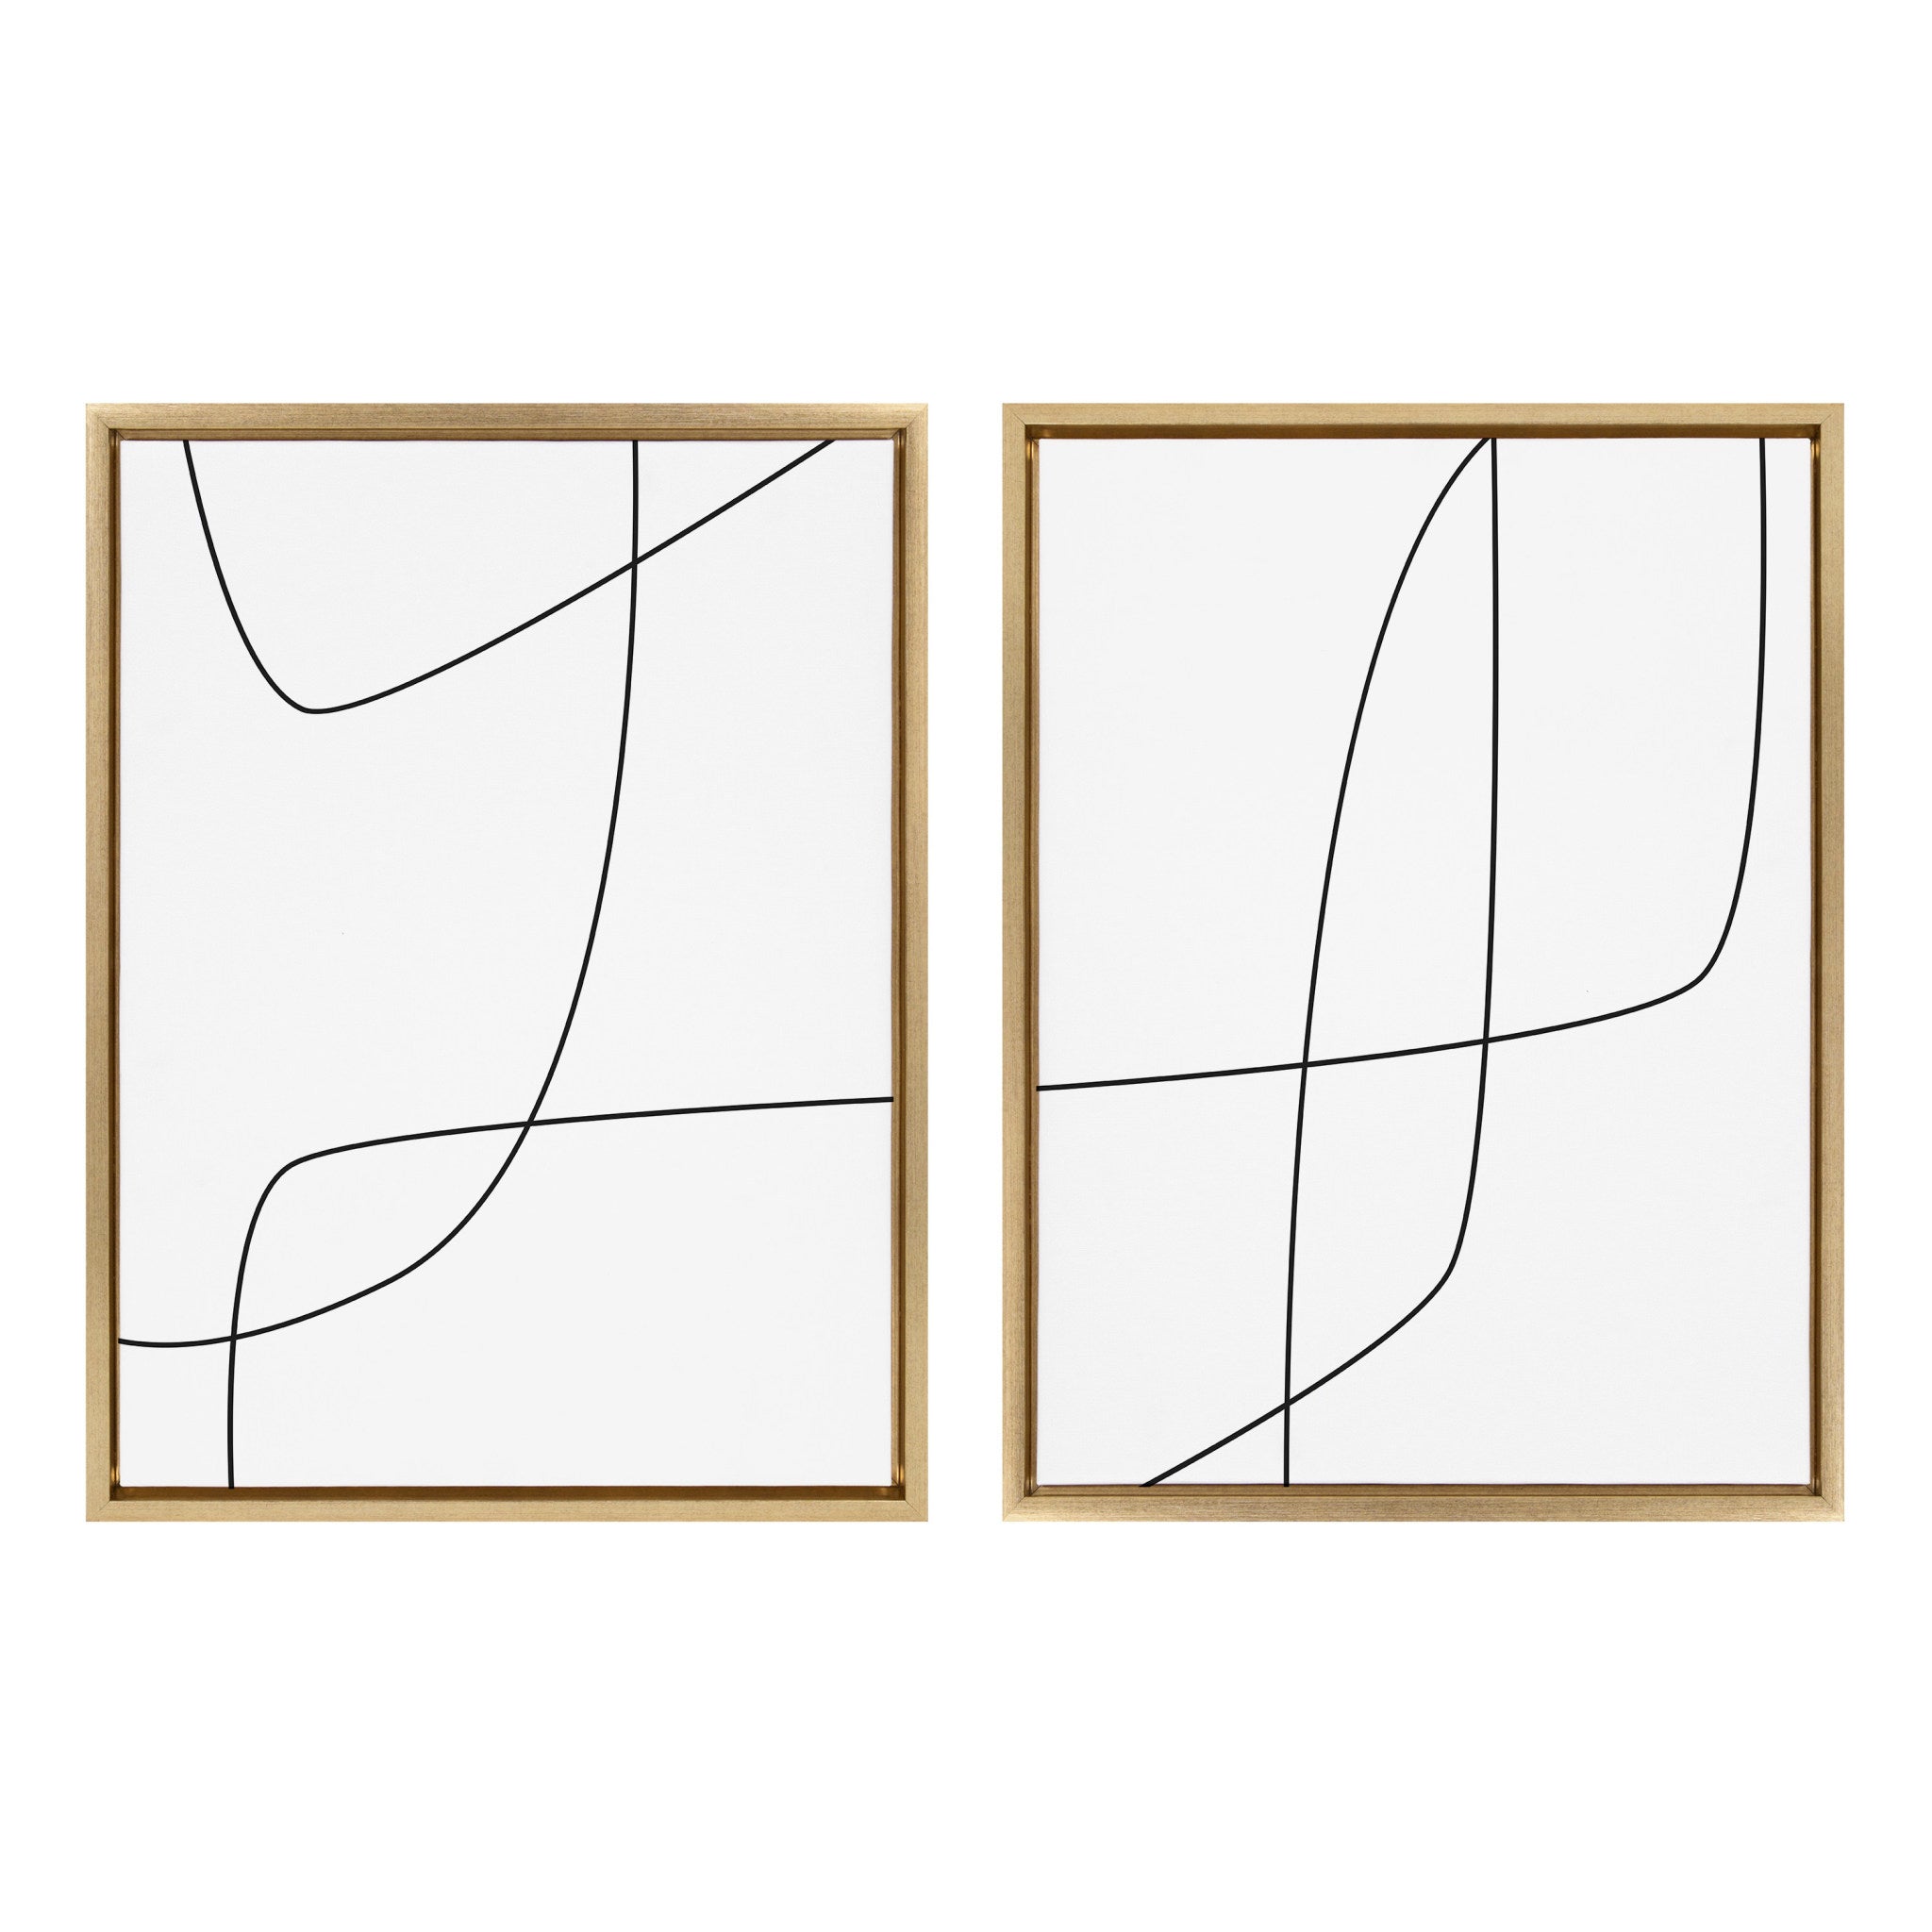 Sylvie Modern Line Abstract 3 and 4 Black and White Framed Canvas by The Creative Bunch Studio